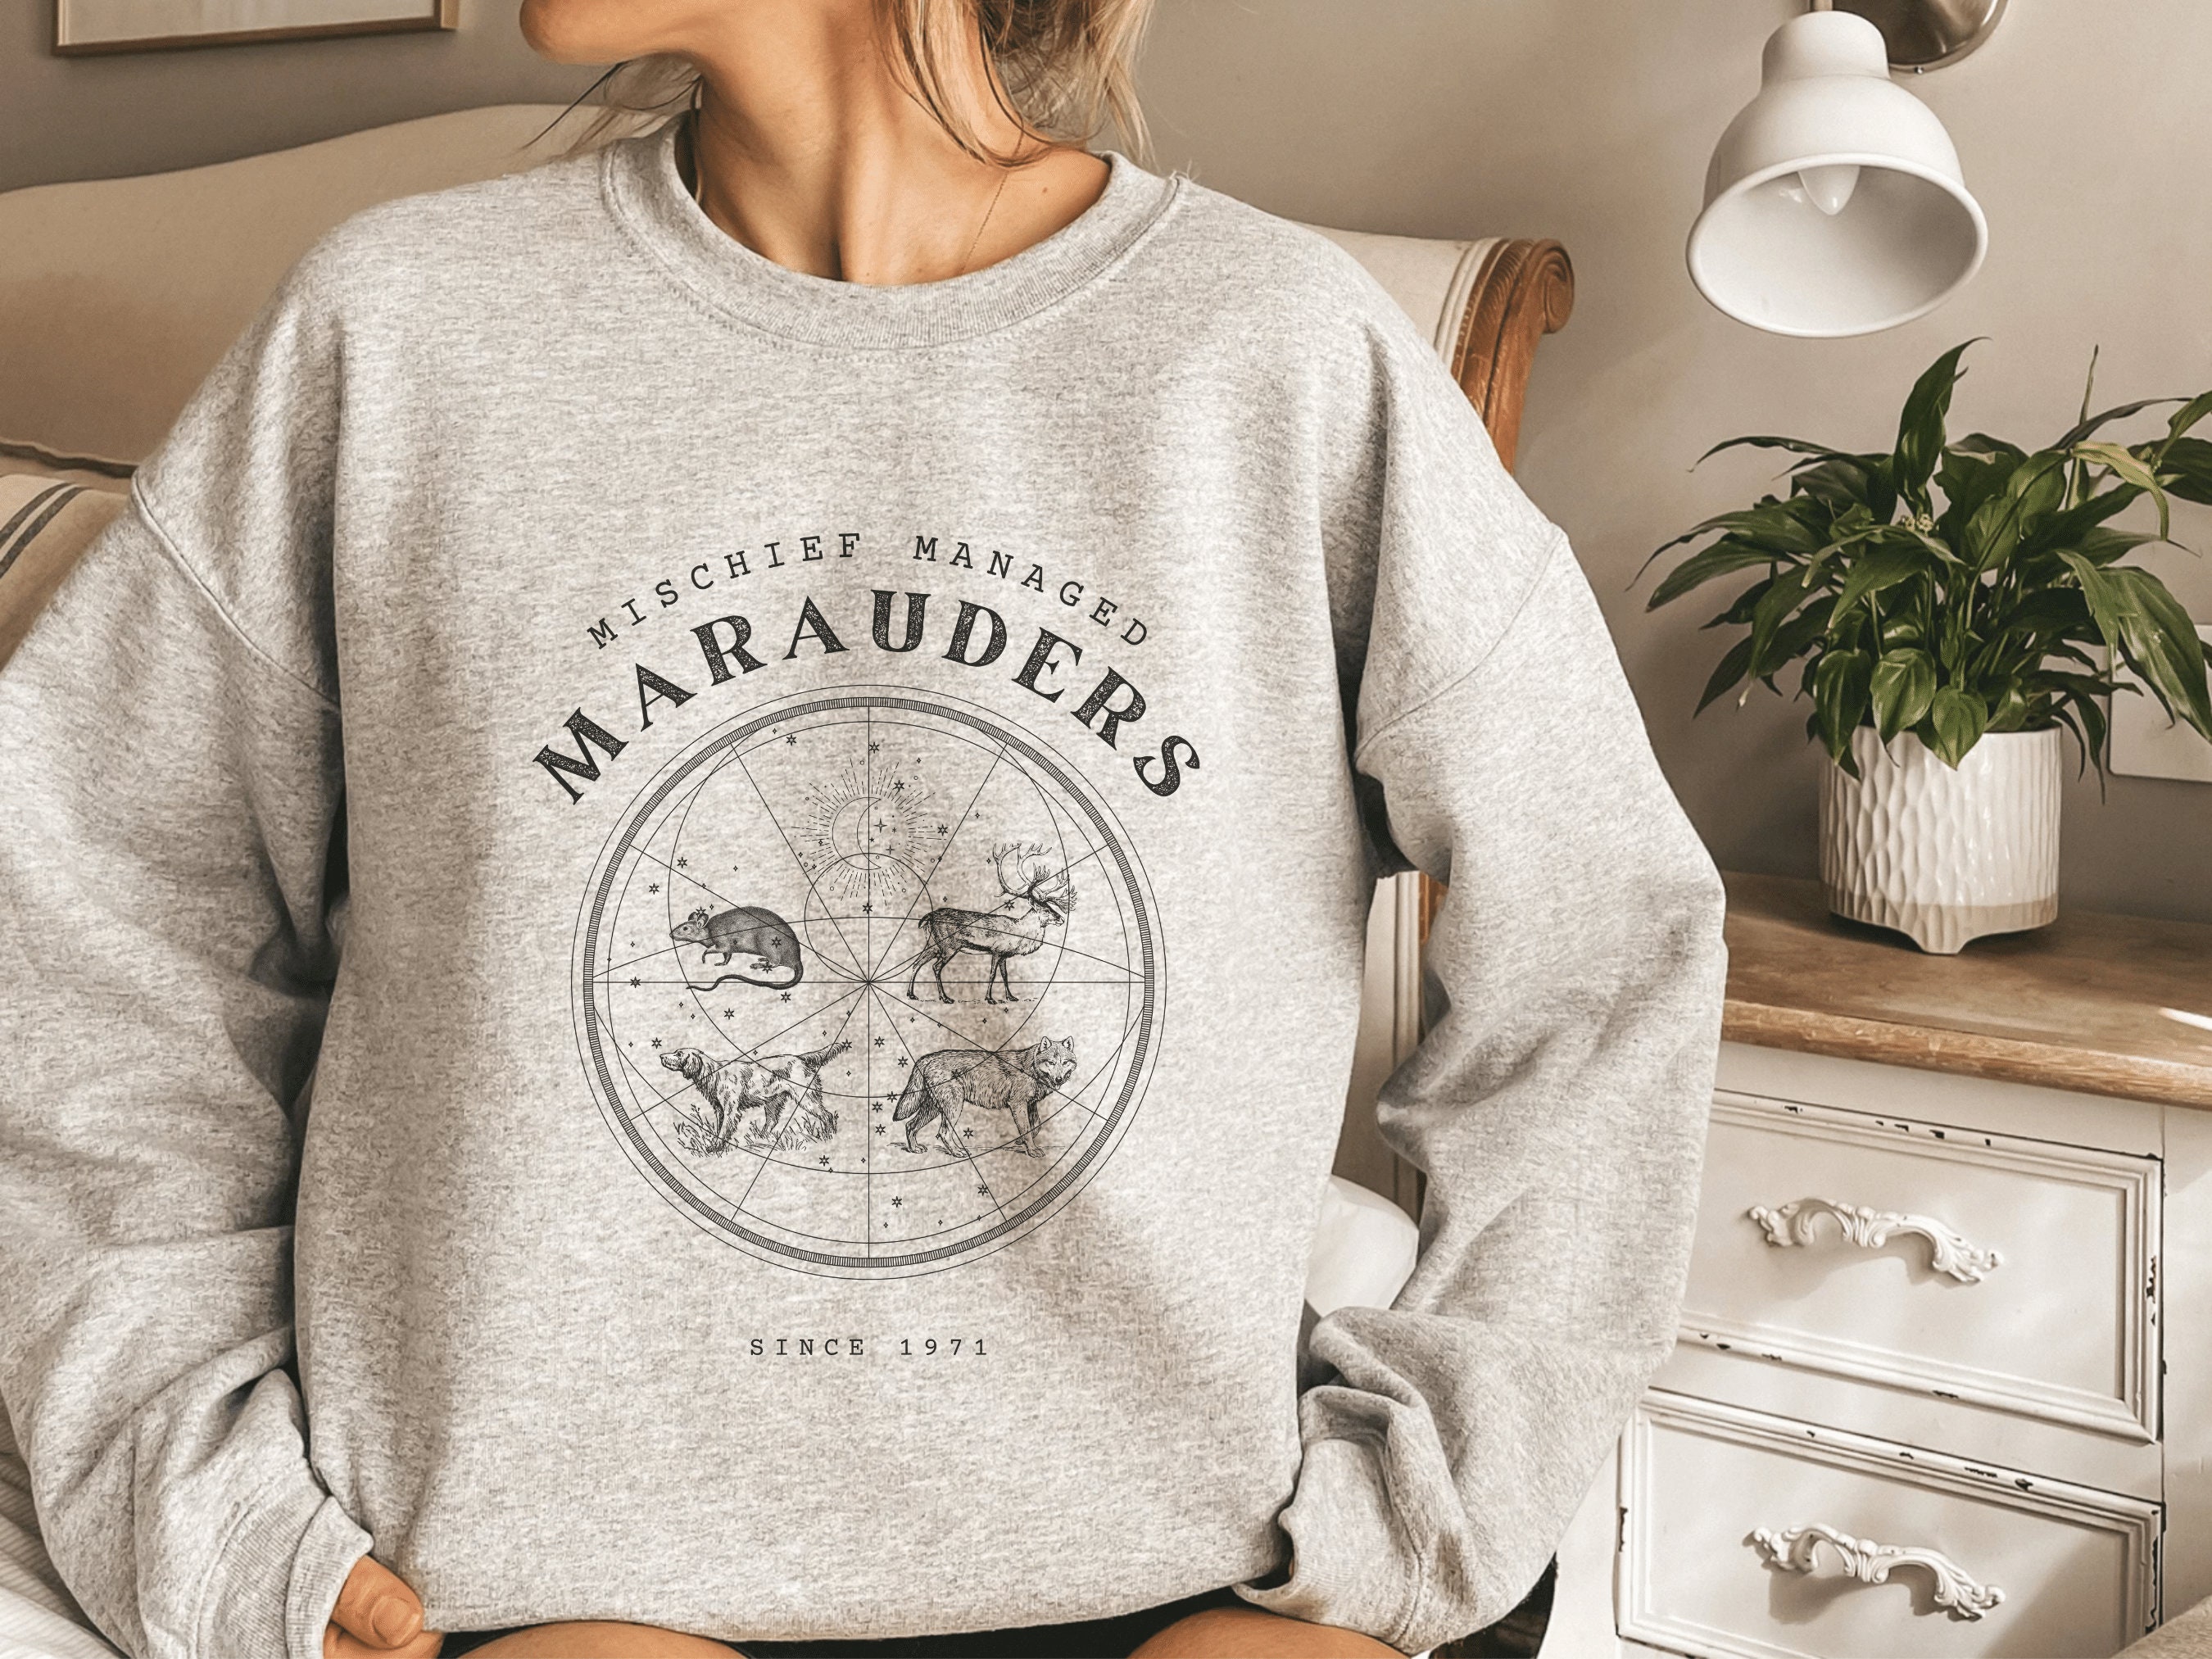 Discover Marauders Sweatshirt Bookish Pullover Remus Lupin Wolfstar Sweater All the Young Dudes ATYD James Potter Sirius Crewneck Moony Hoodie Wizard Sweatshirt